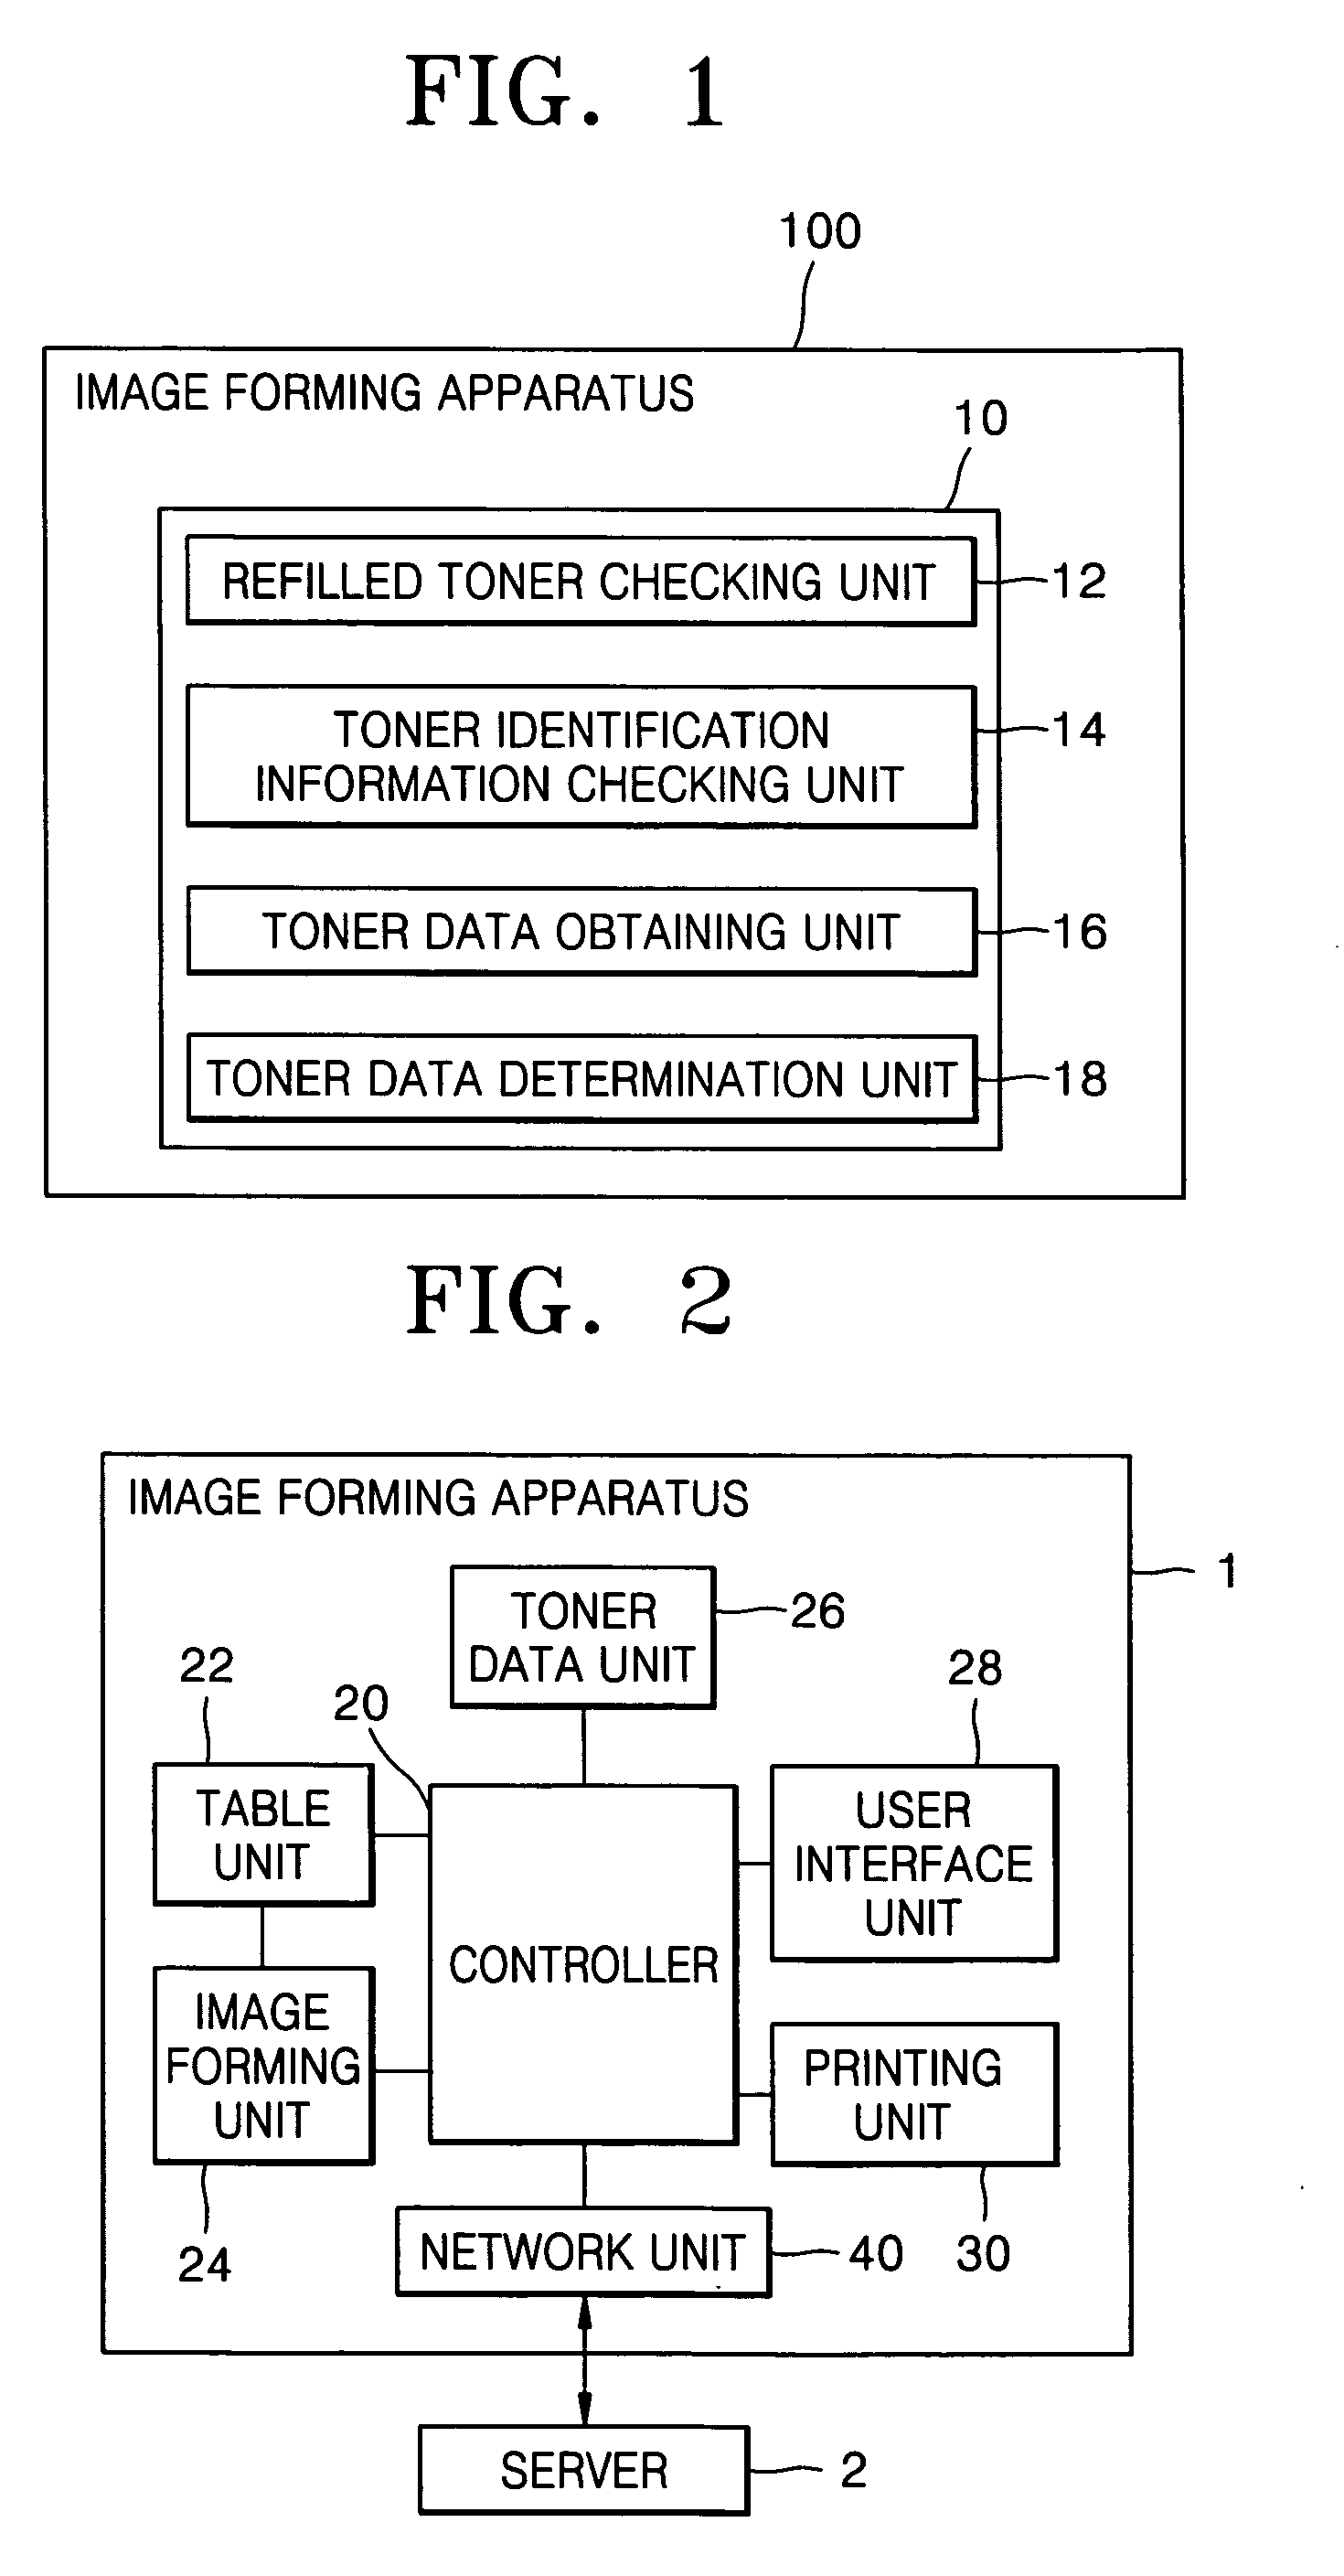 Method and apparatus for obtaining refilled toner data